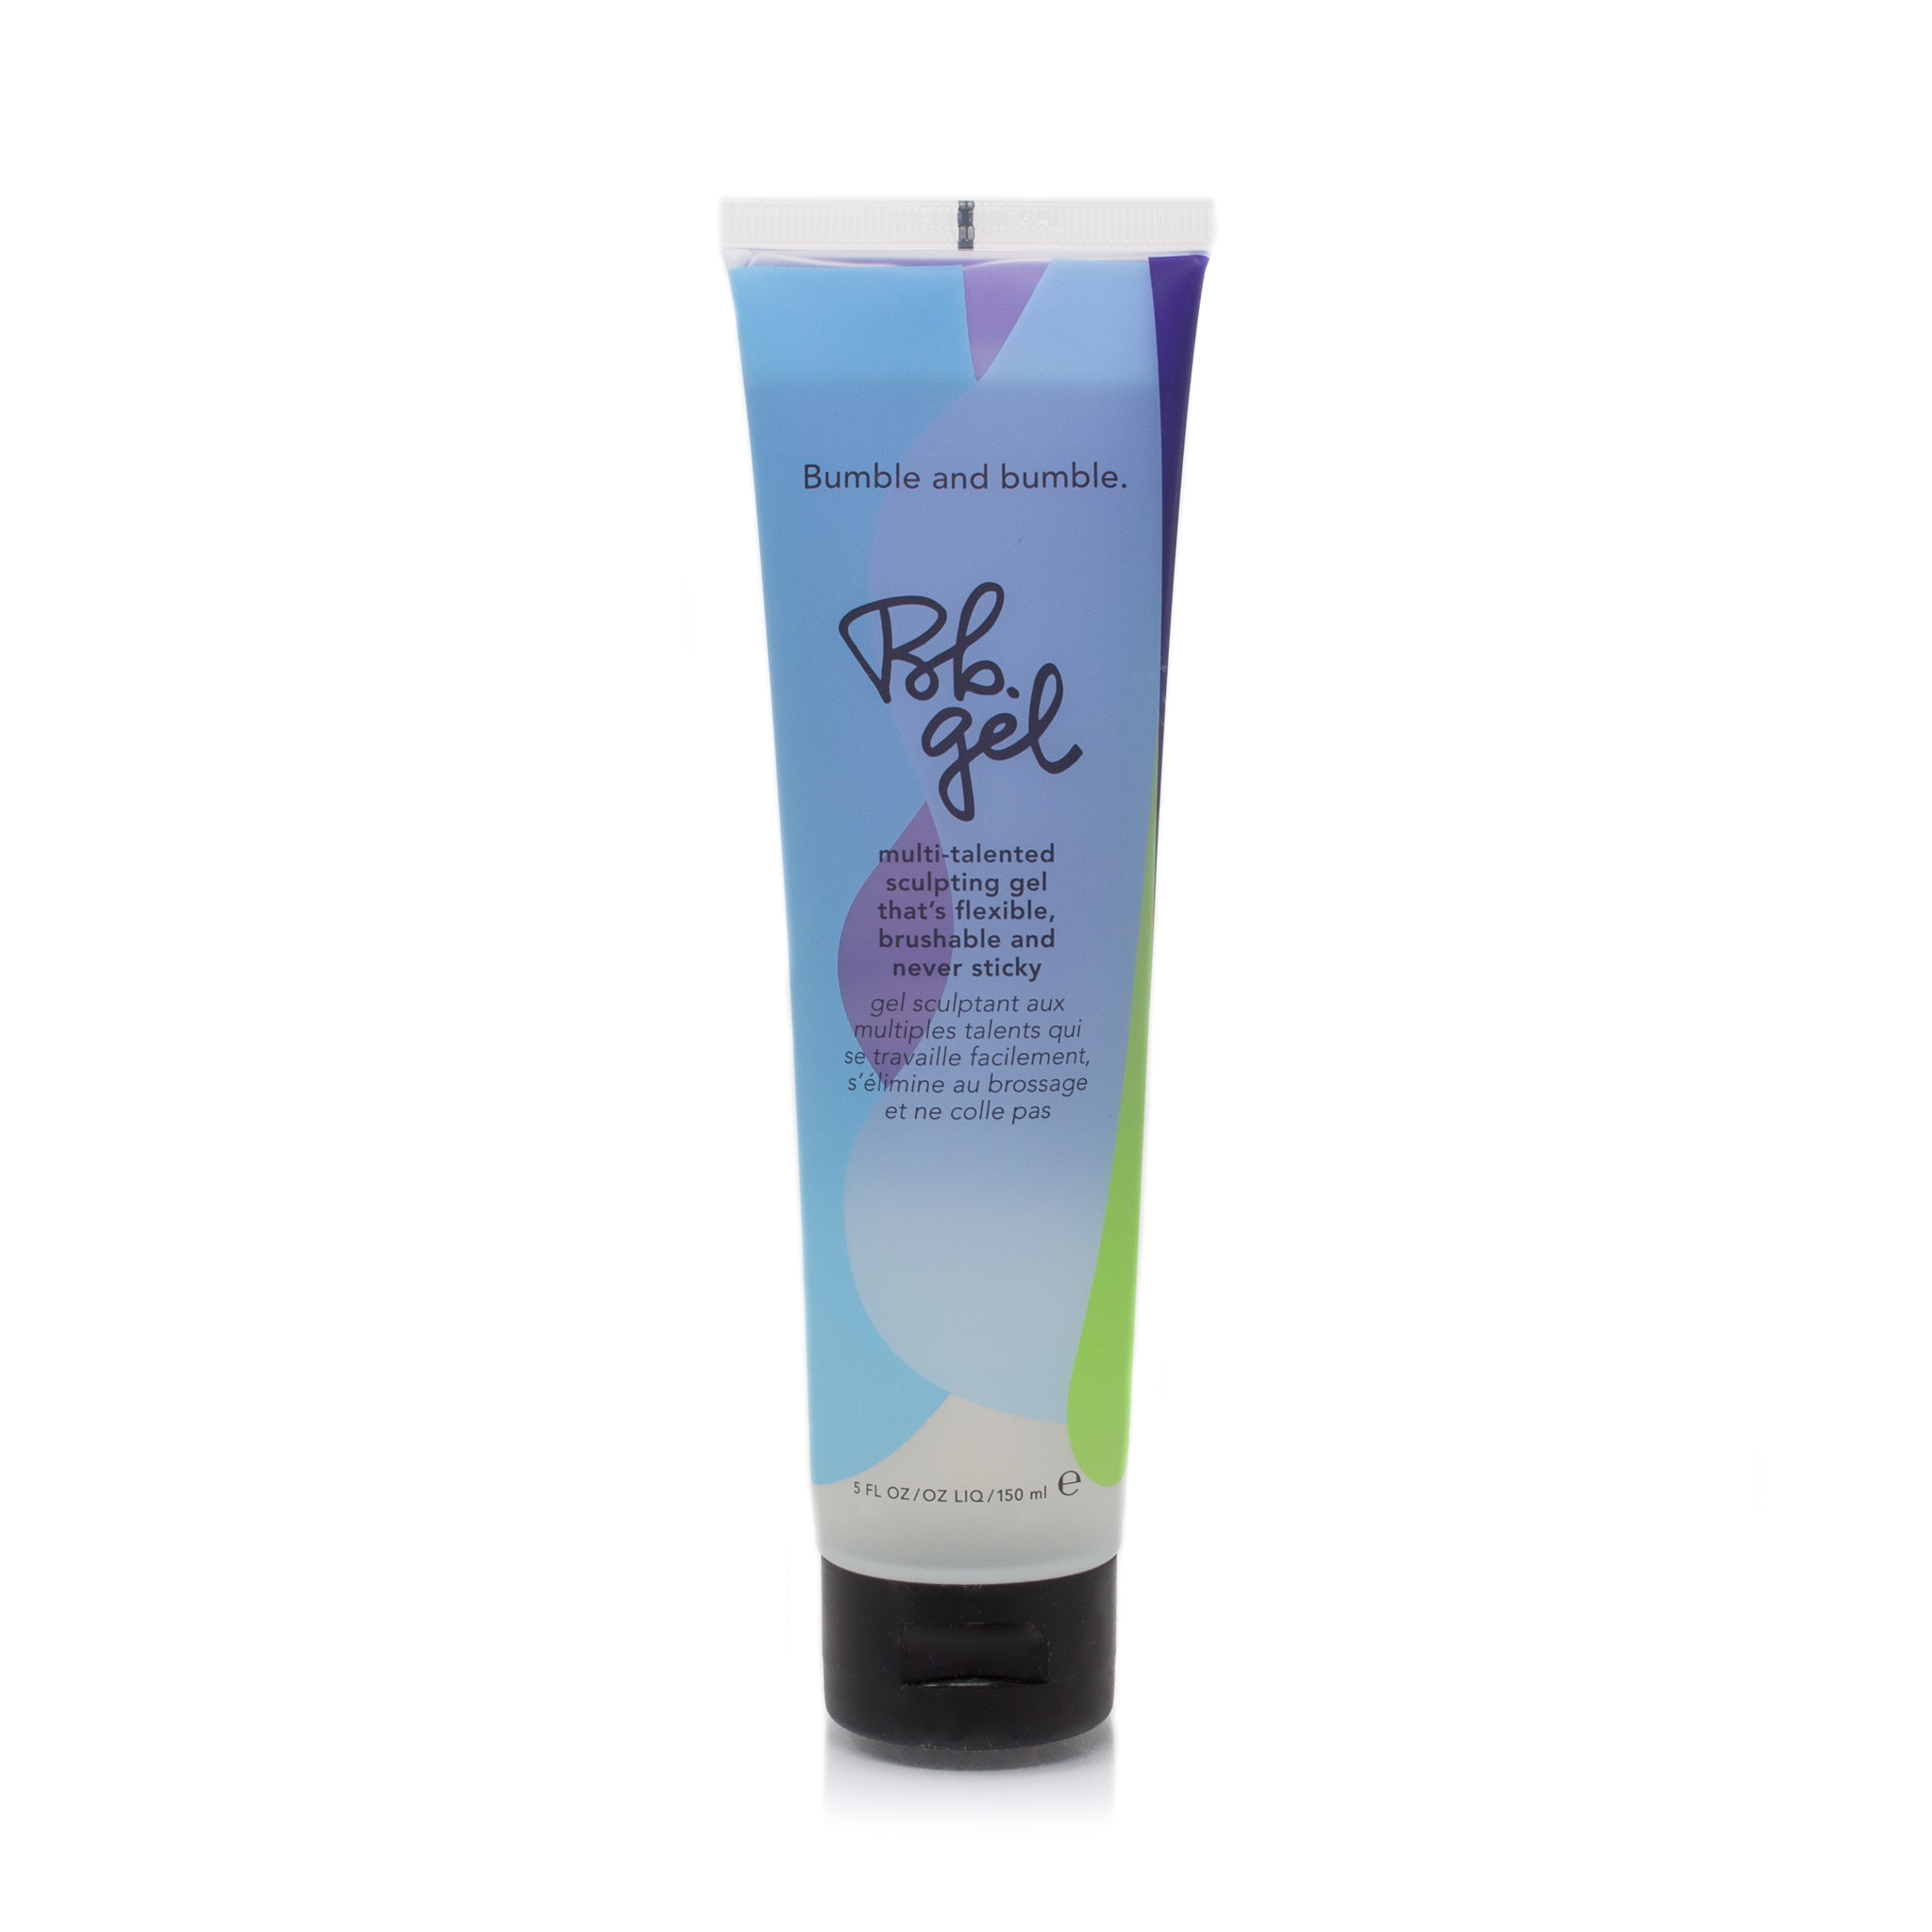 Bumble and Bumble Gel Multi Talented Sculpting Gel 5oz/150ml ...